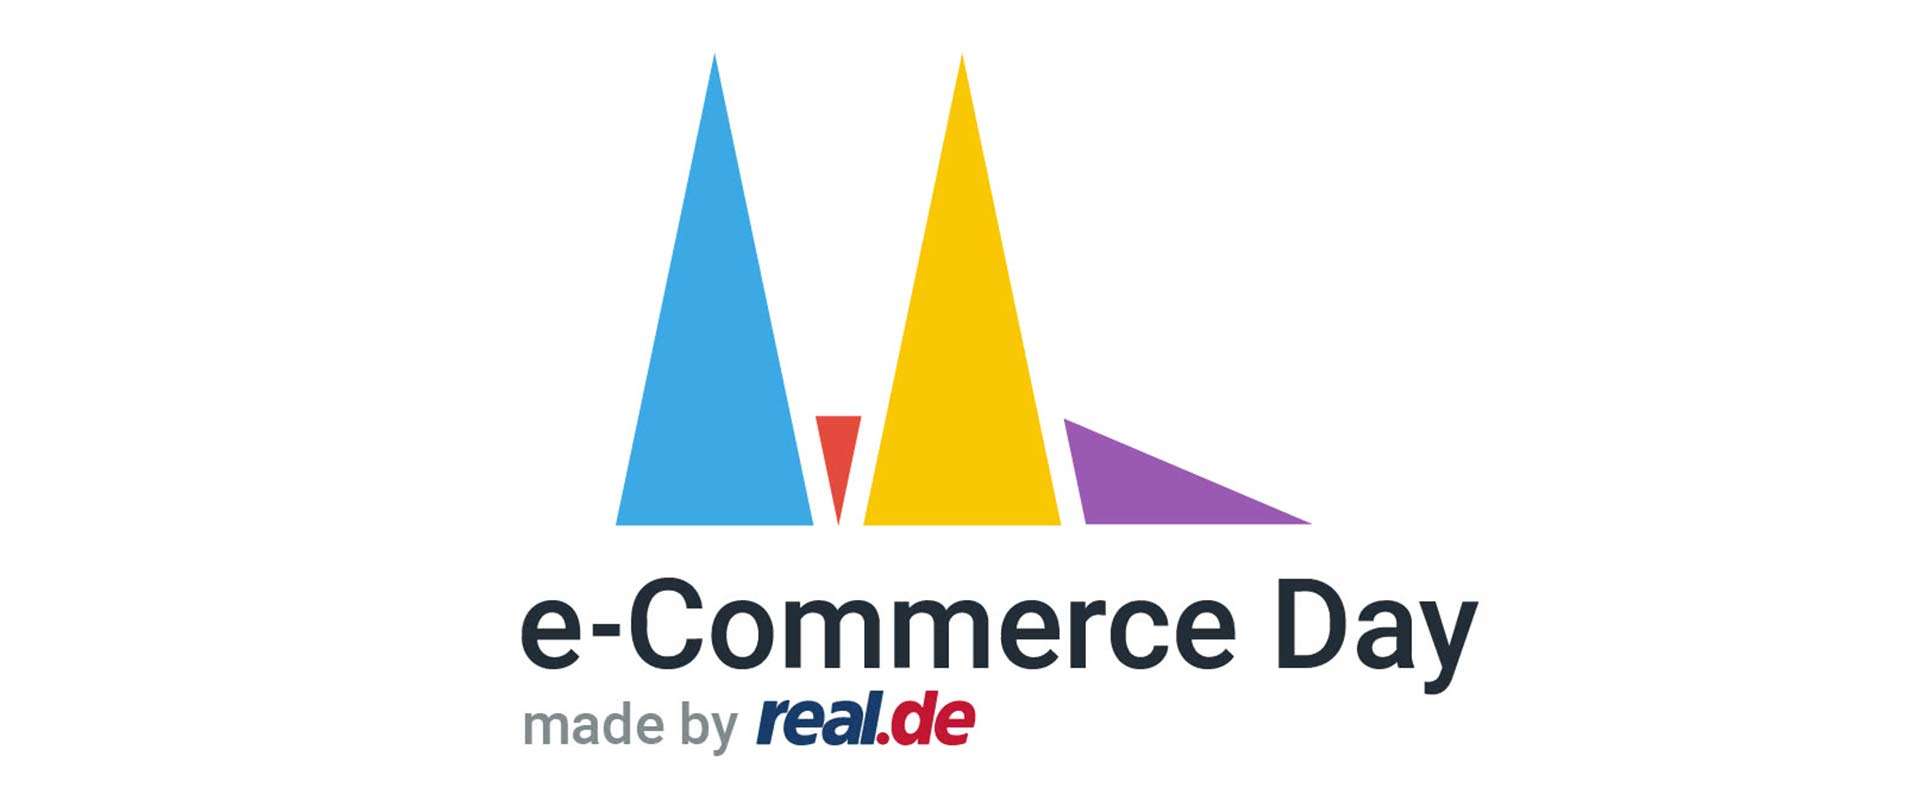 e-Commerce Day by real.de